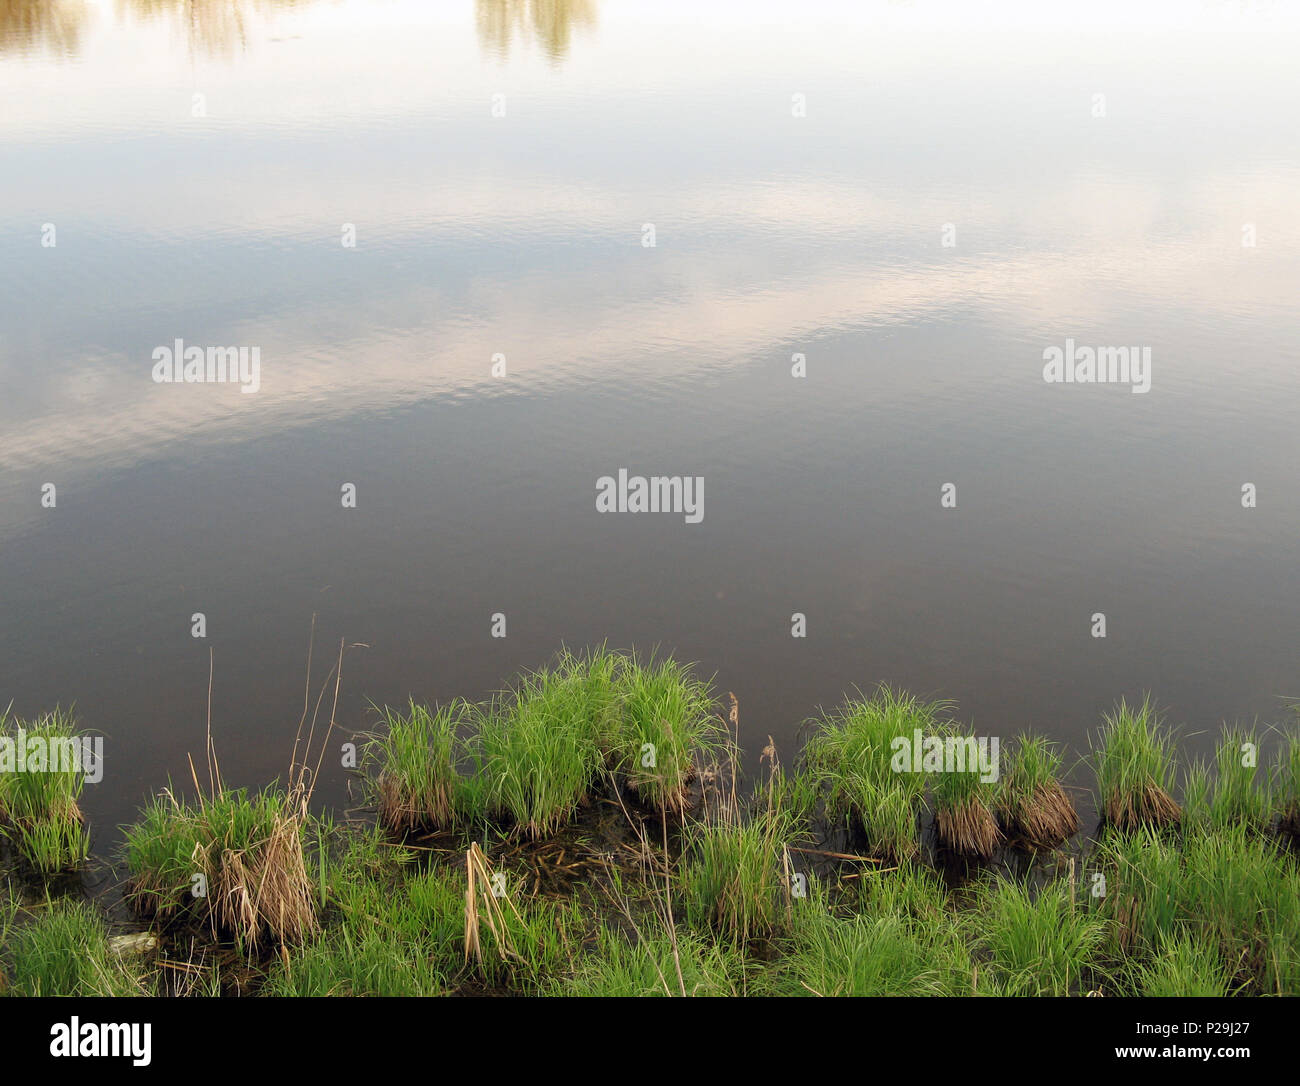 Pond shore with islets overgrown with grass and sky with clouds reflected on the water surface Stock Photo